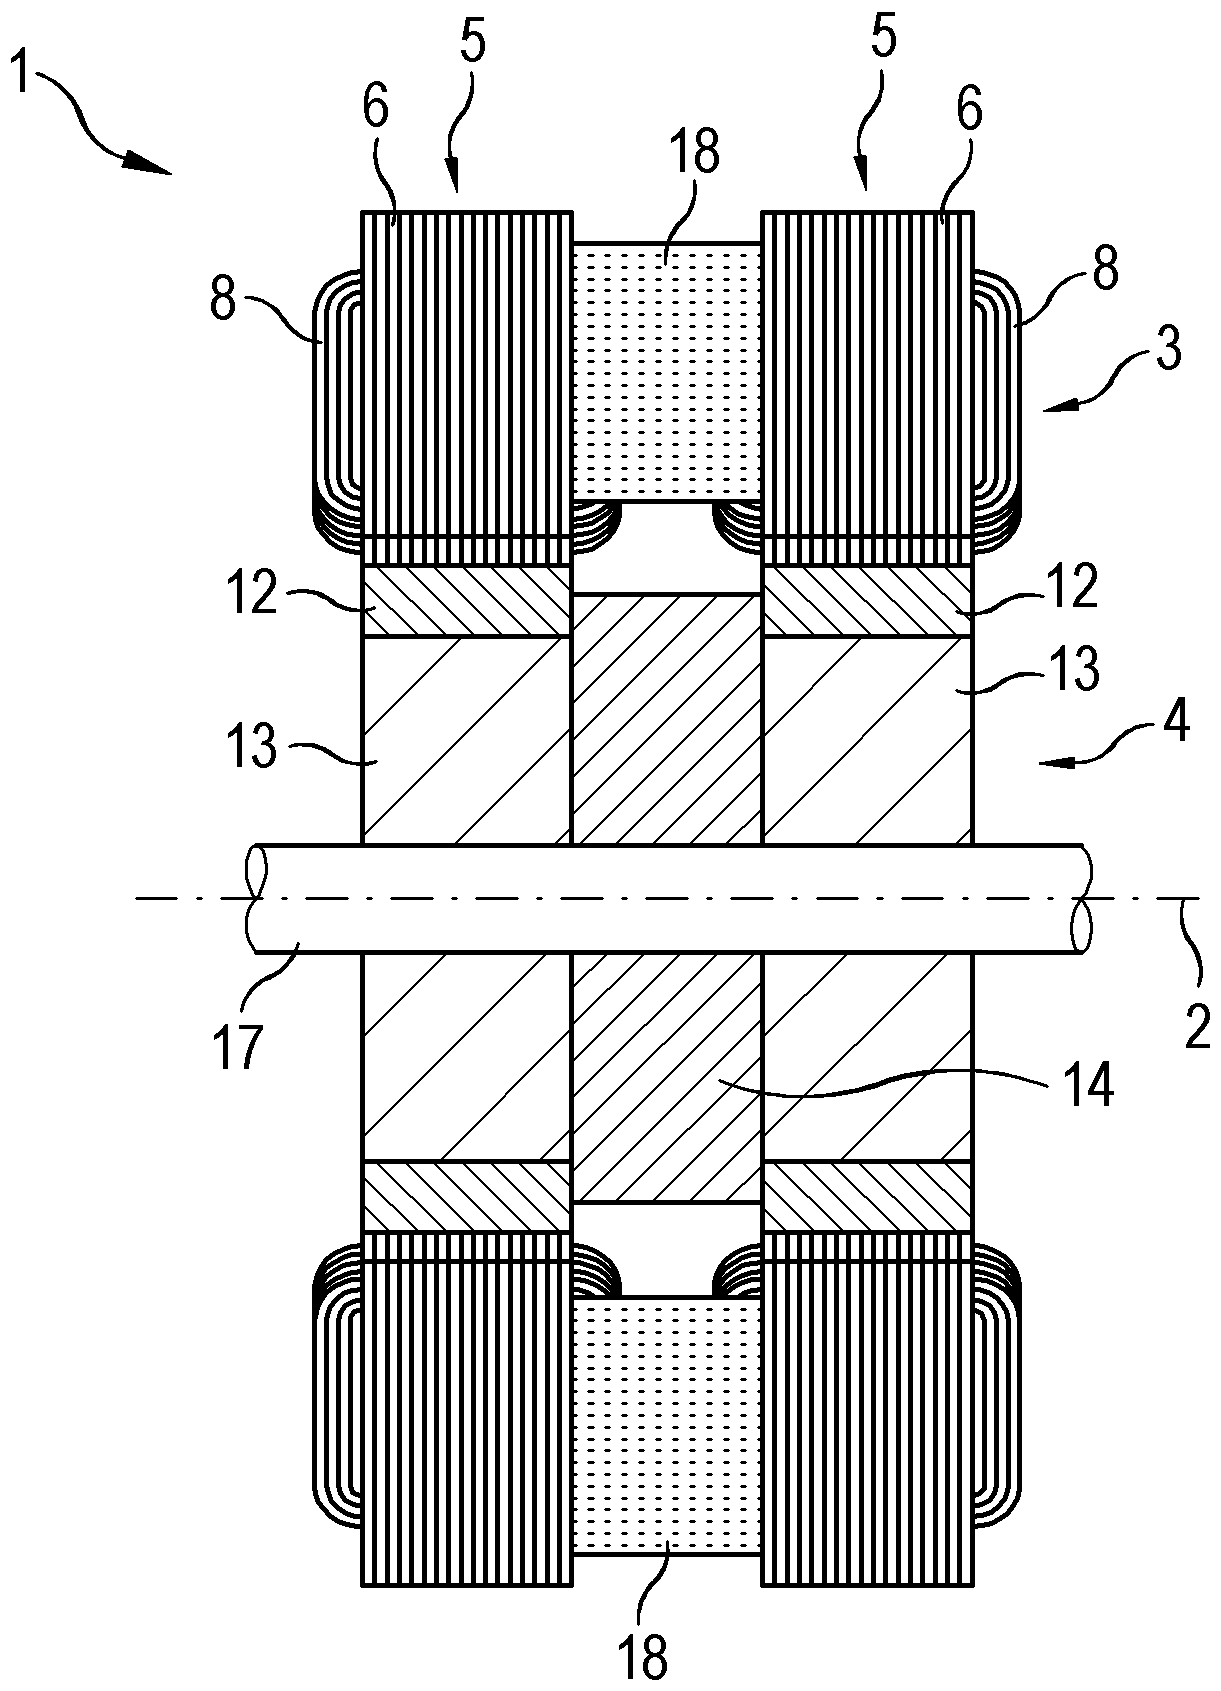 Active radial magnetic bearing with a yoke coil